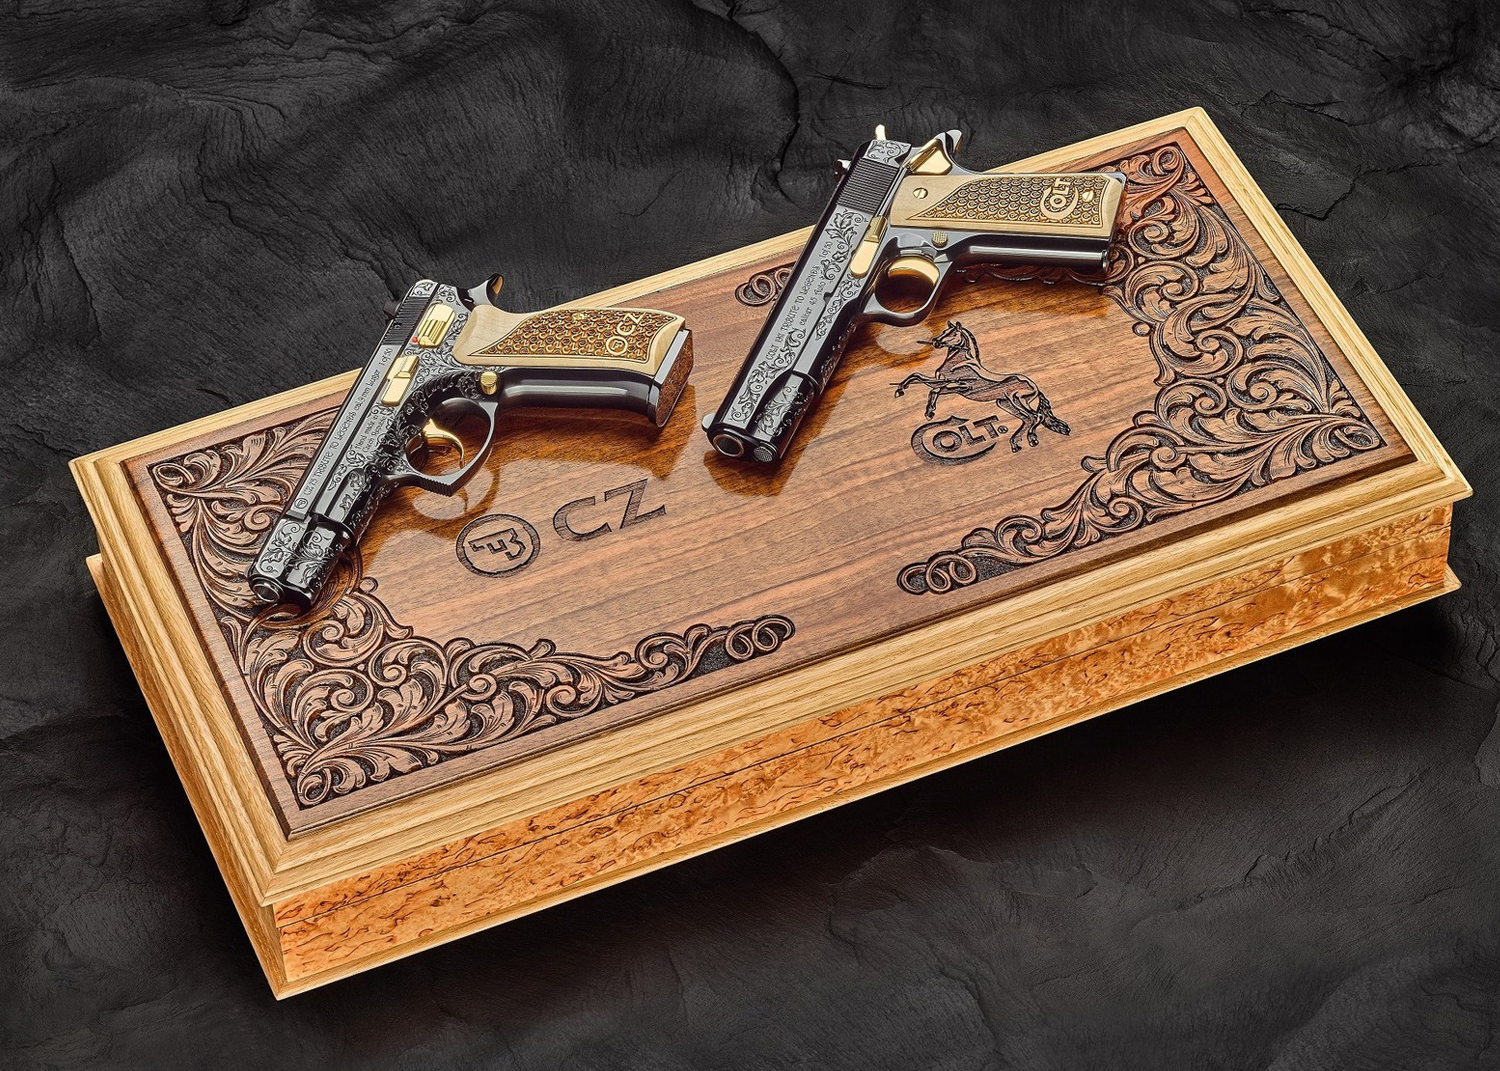 Limited Edition Colt 1911 and CZ-75